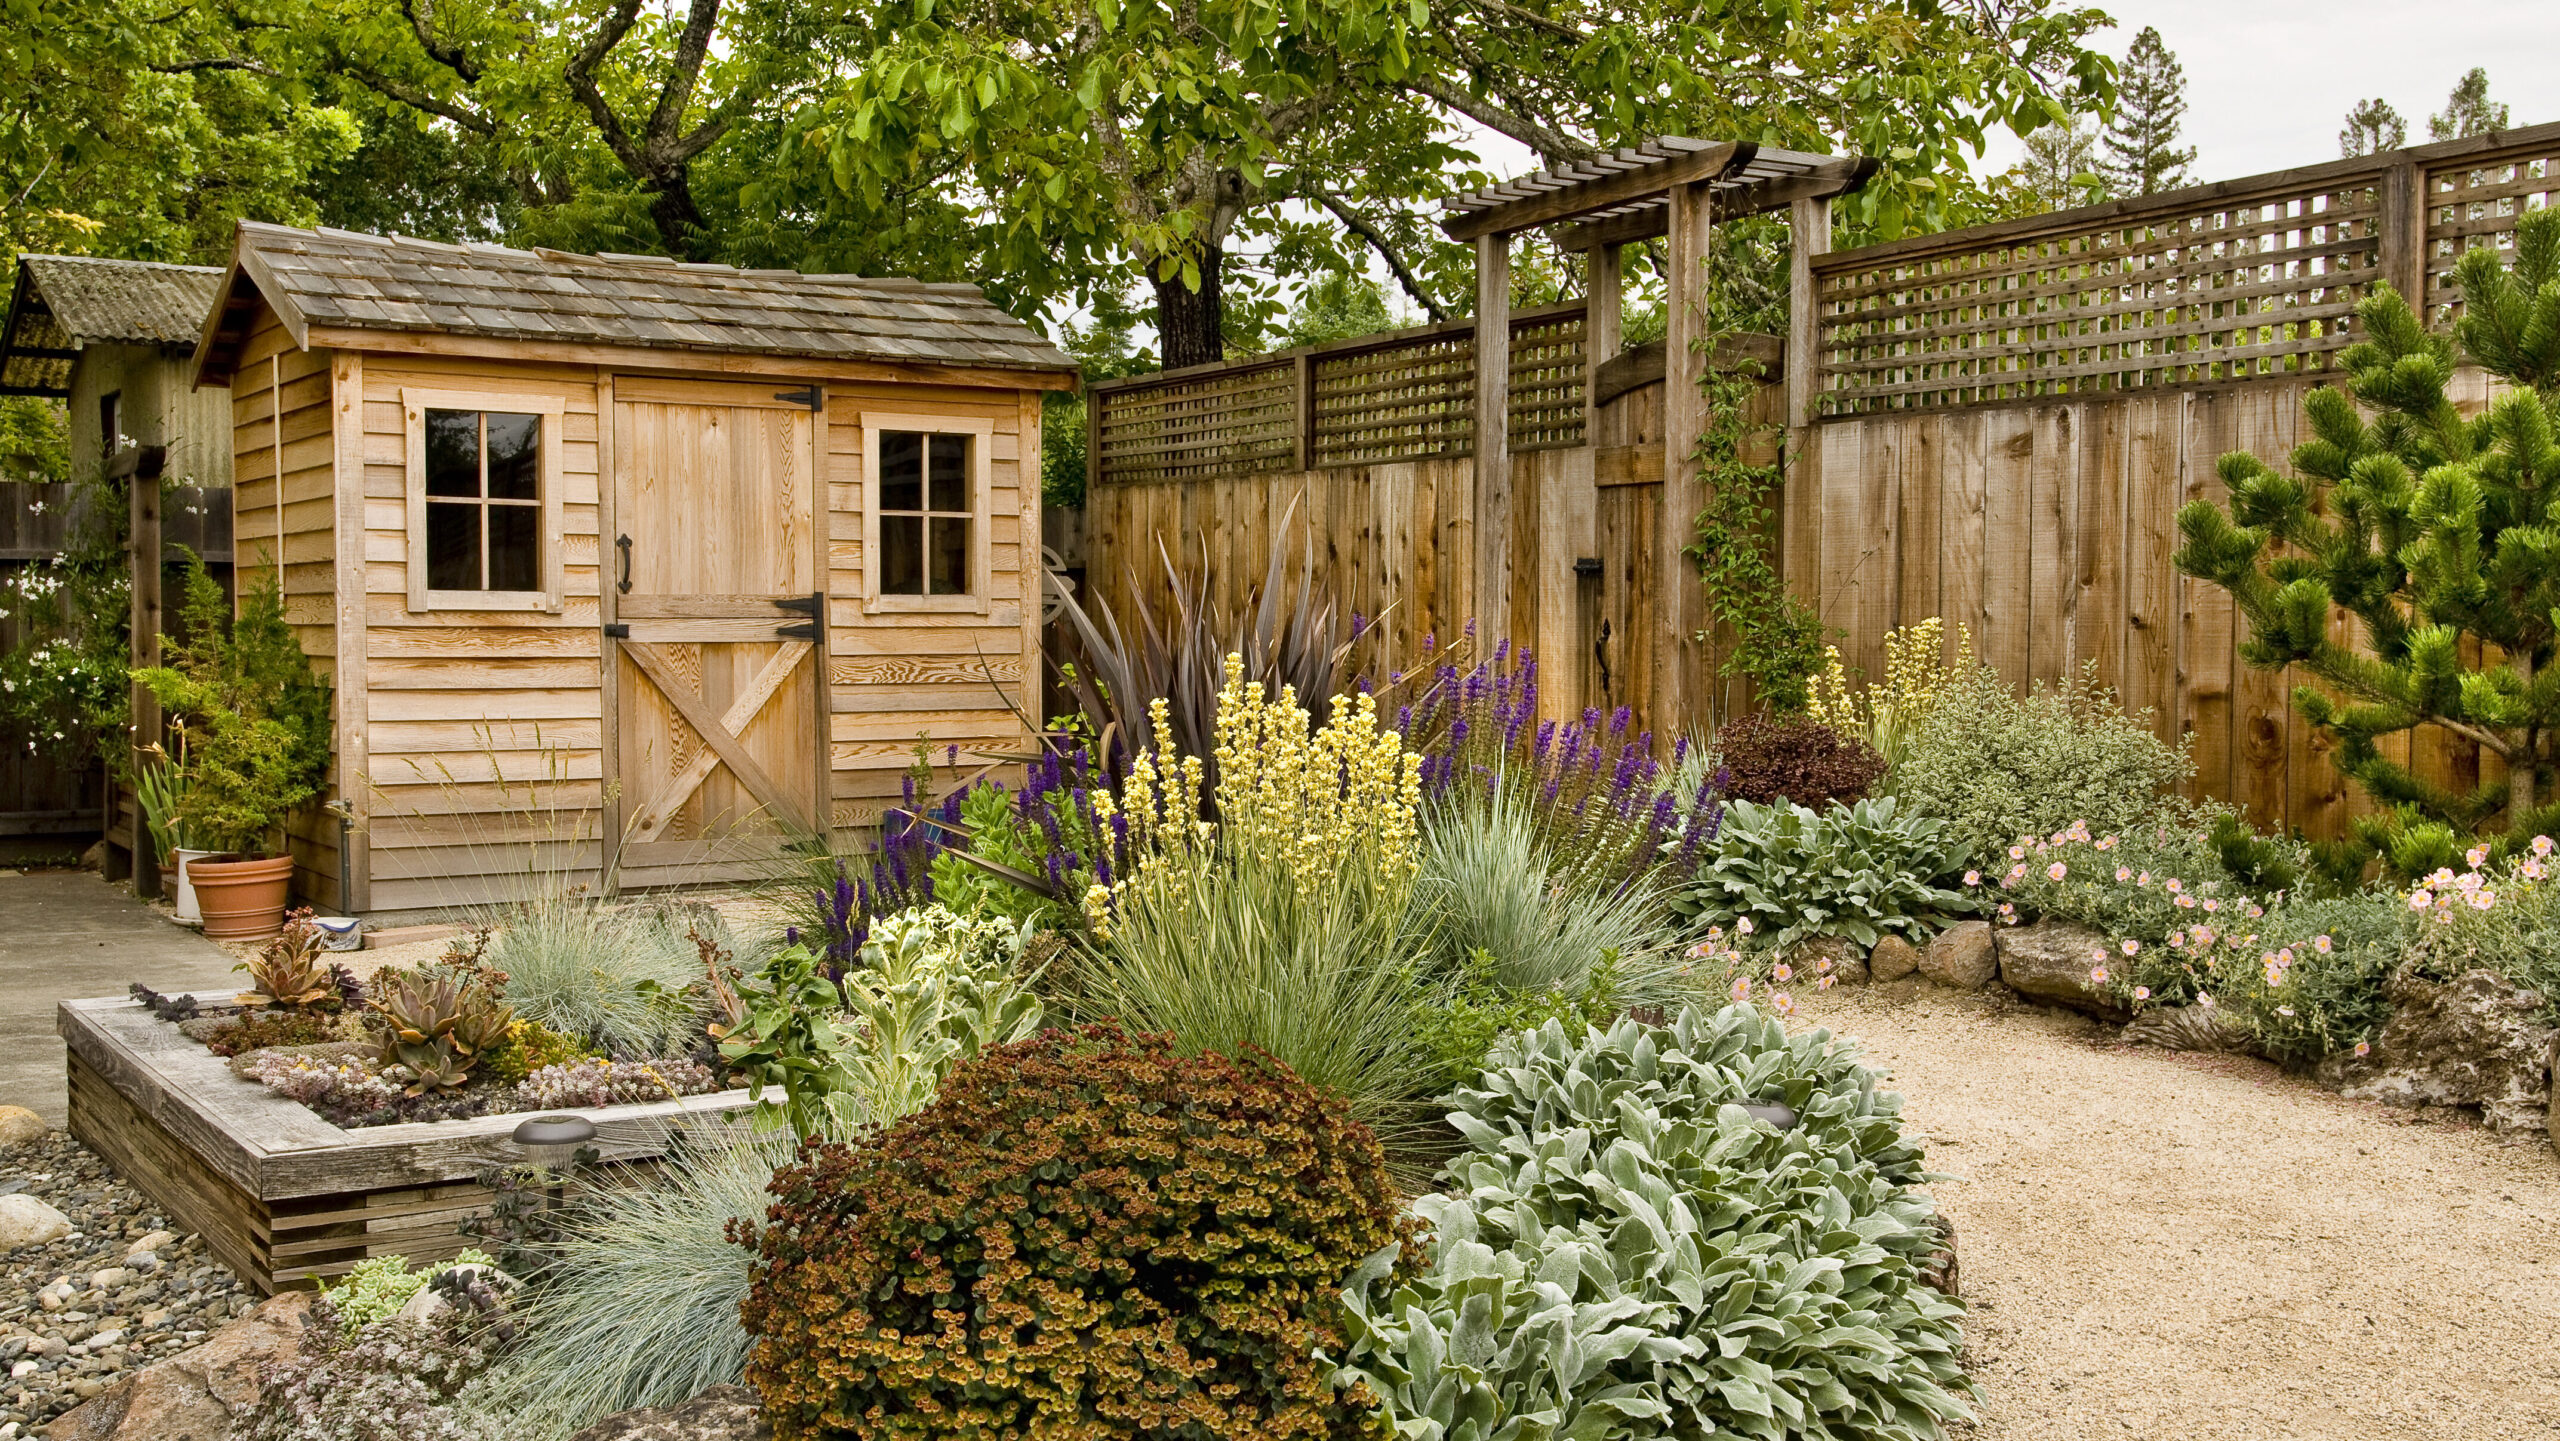 Rustic wooden shed in a lush garden, potentially used as a grow room, surrounded by diverse plants and a gravel path.